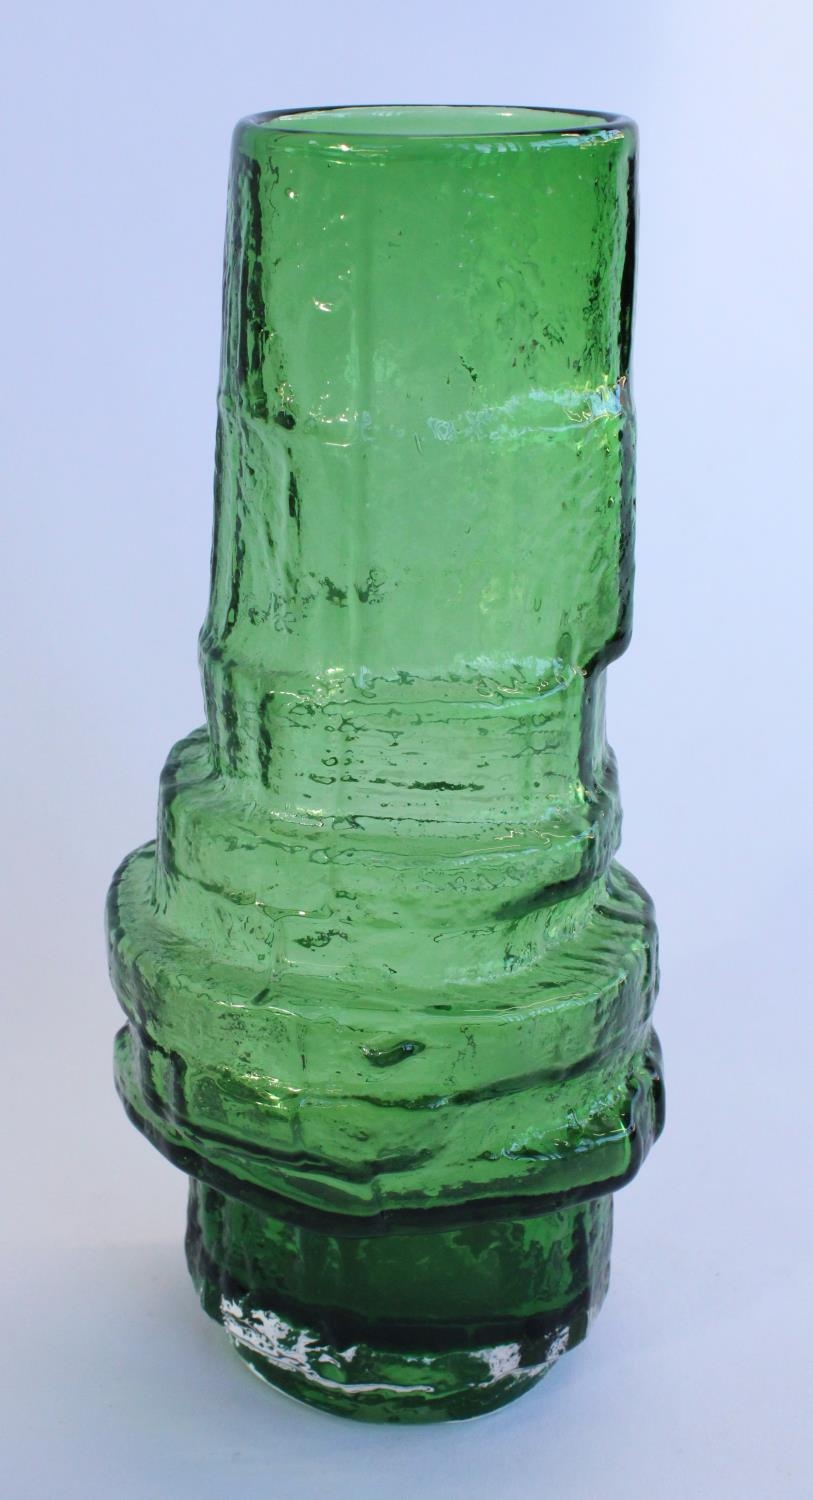 Whitefriars 'Hooped' 9680 textured glass vase in meadow green colourway as designed by Geoffrey - Image 2 of 2